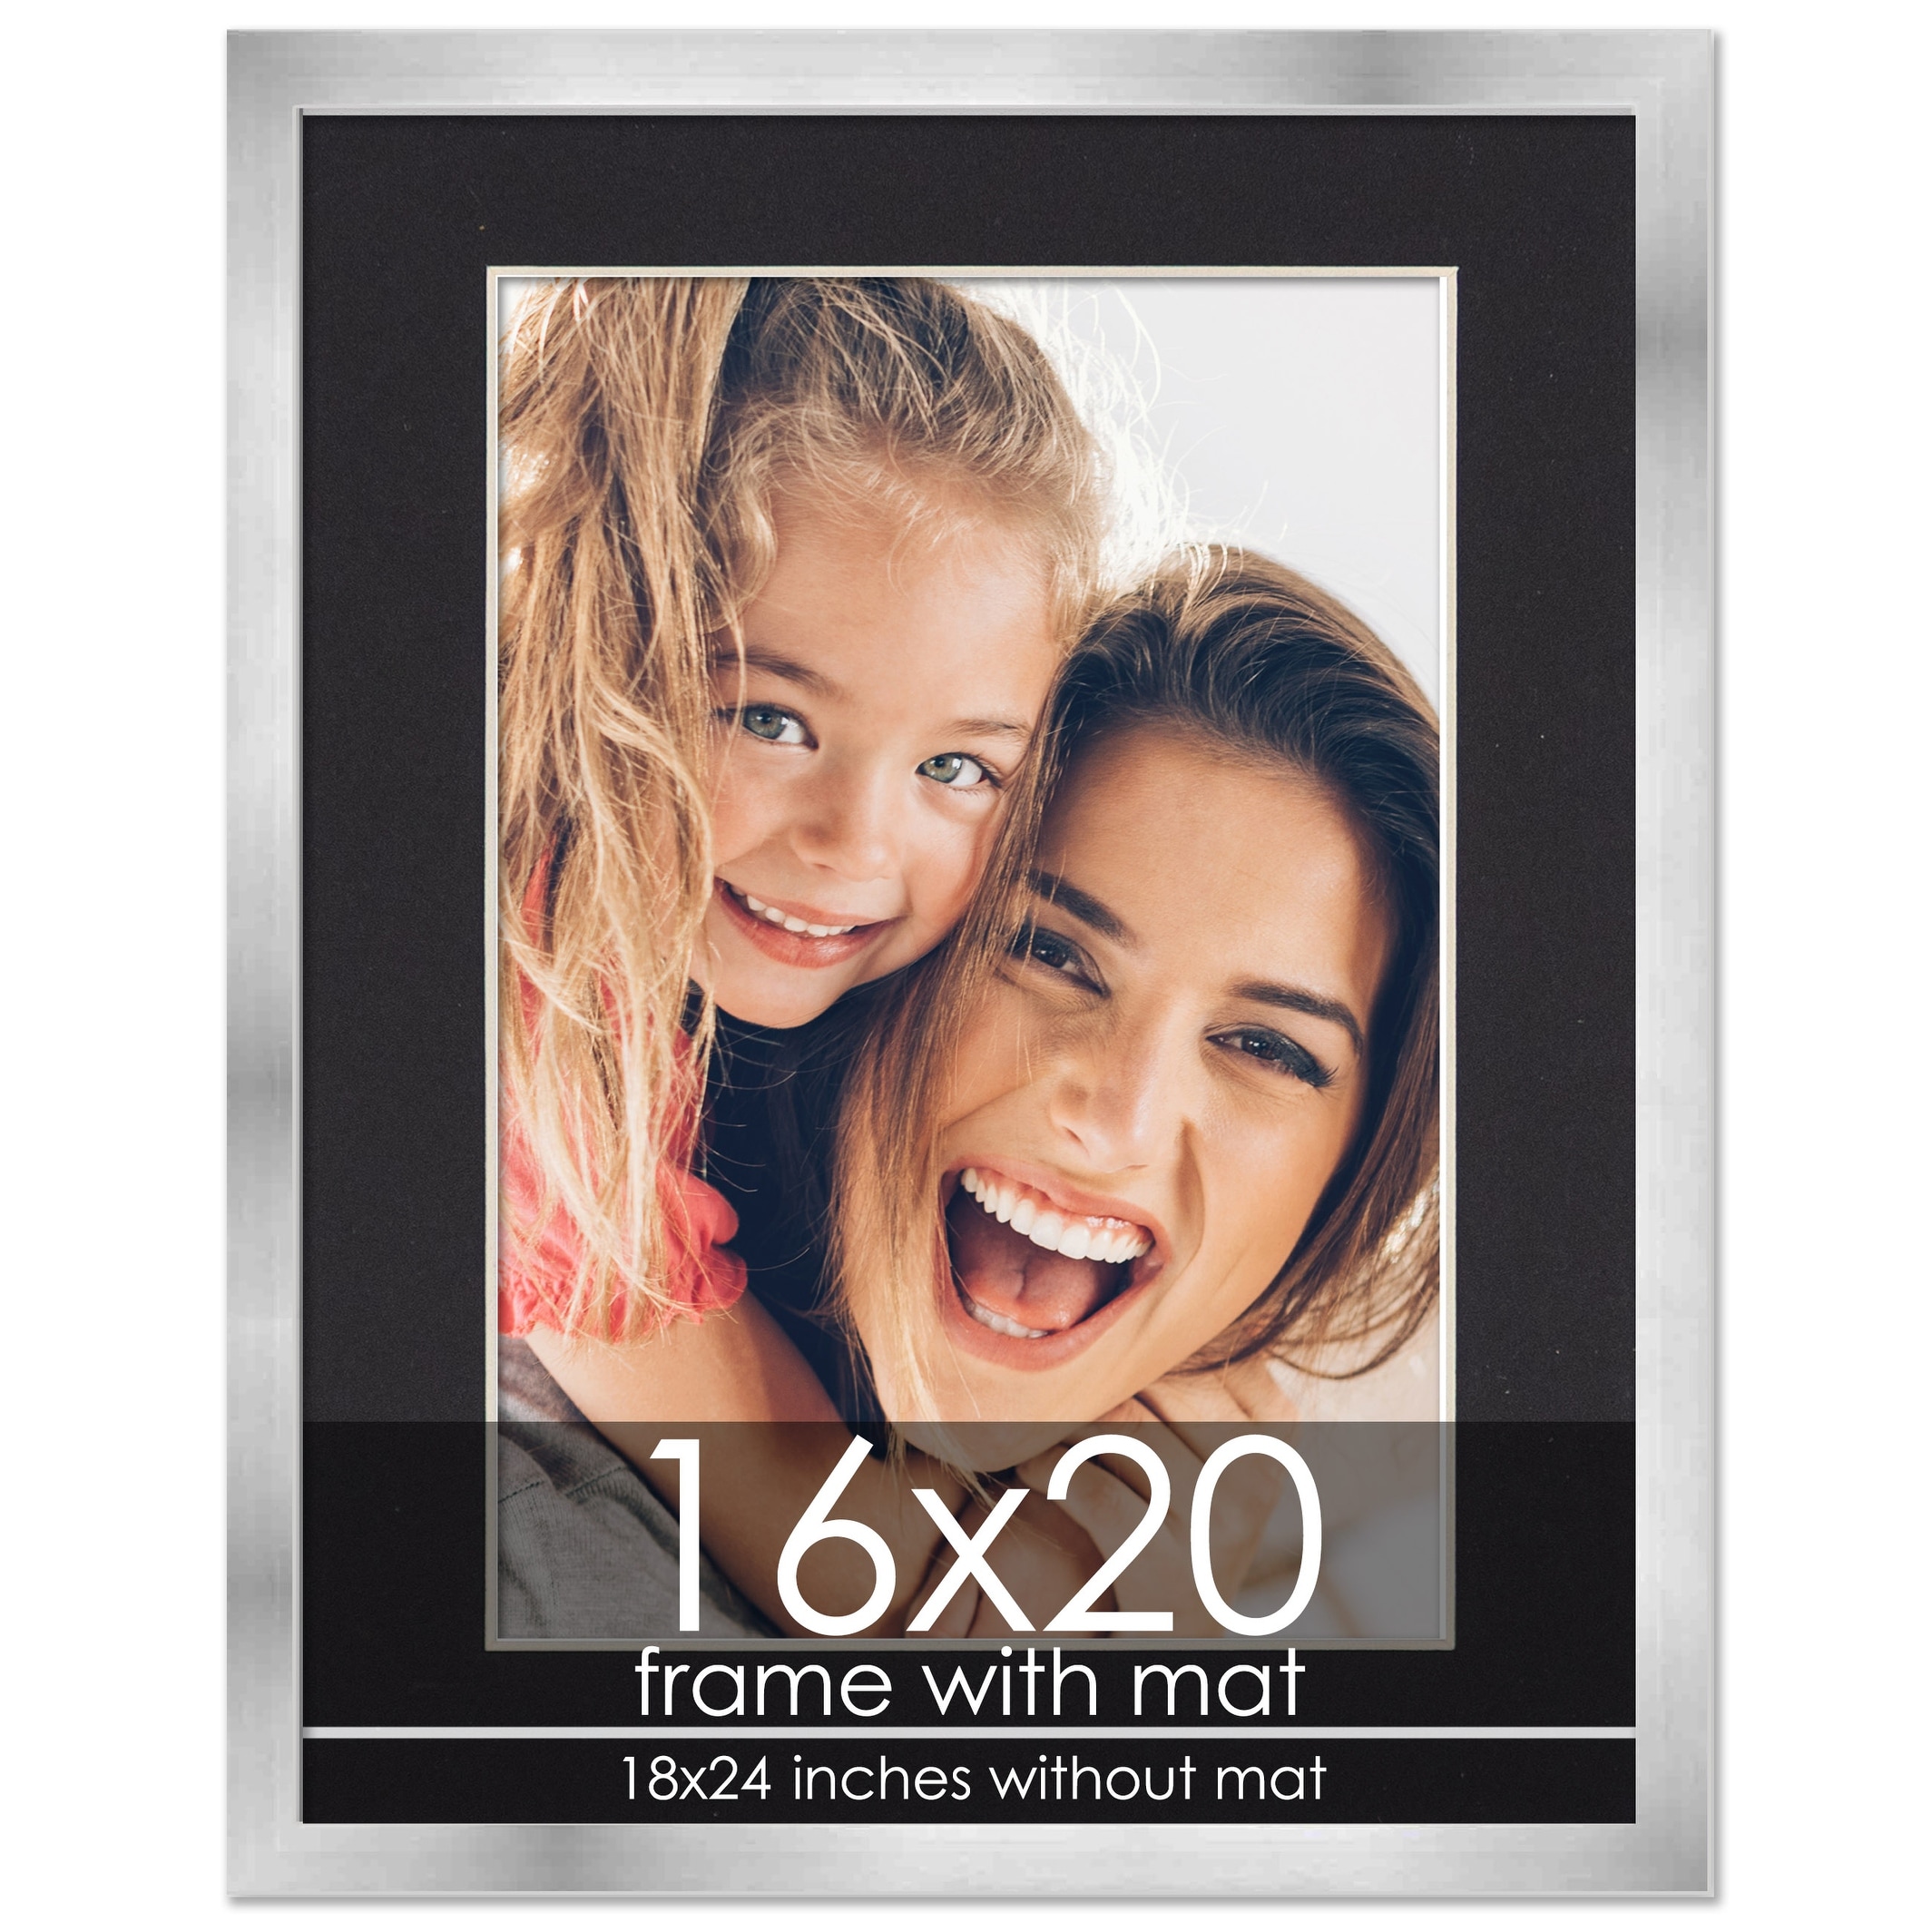 Gold Ornate 16x20 Picture Frame 16x20 Frame 16 x 20 16 by 20